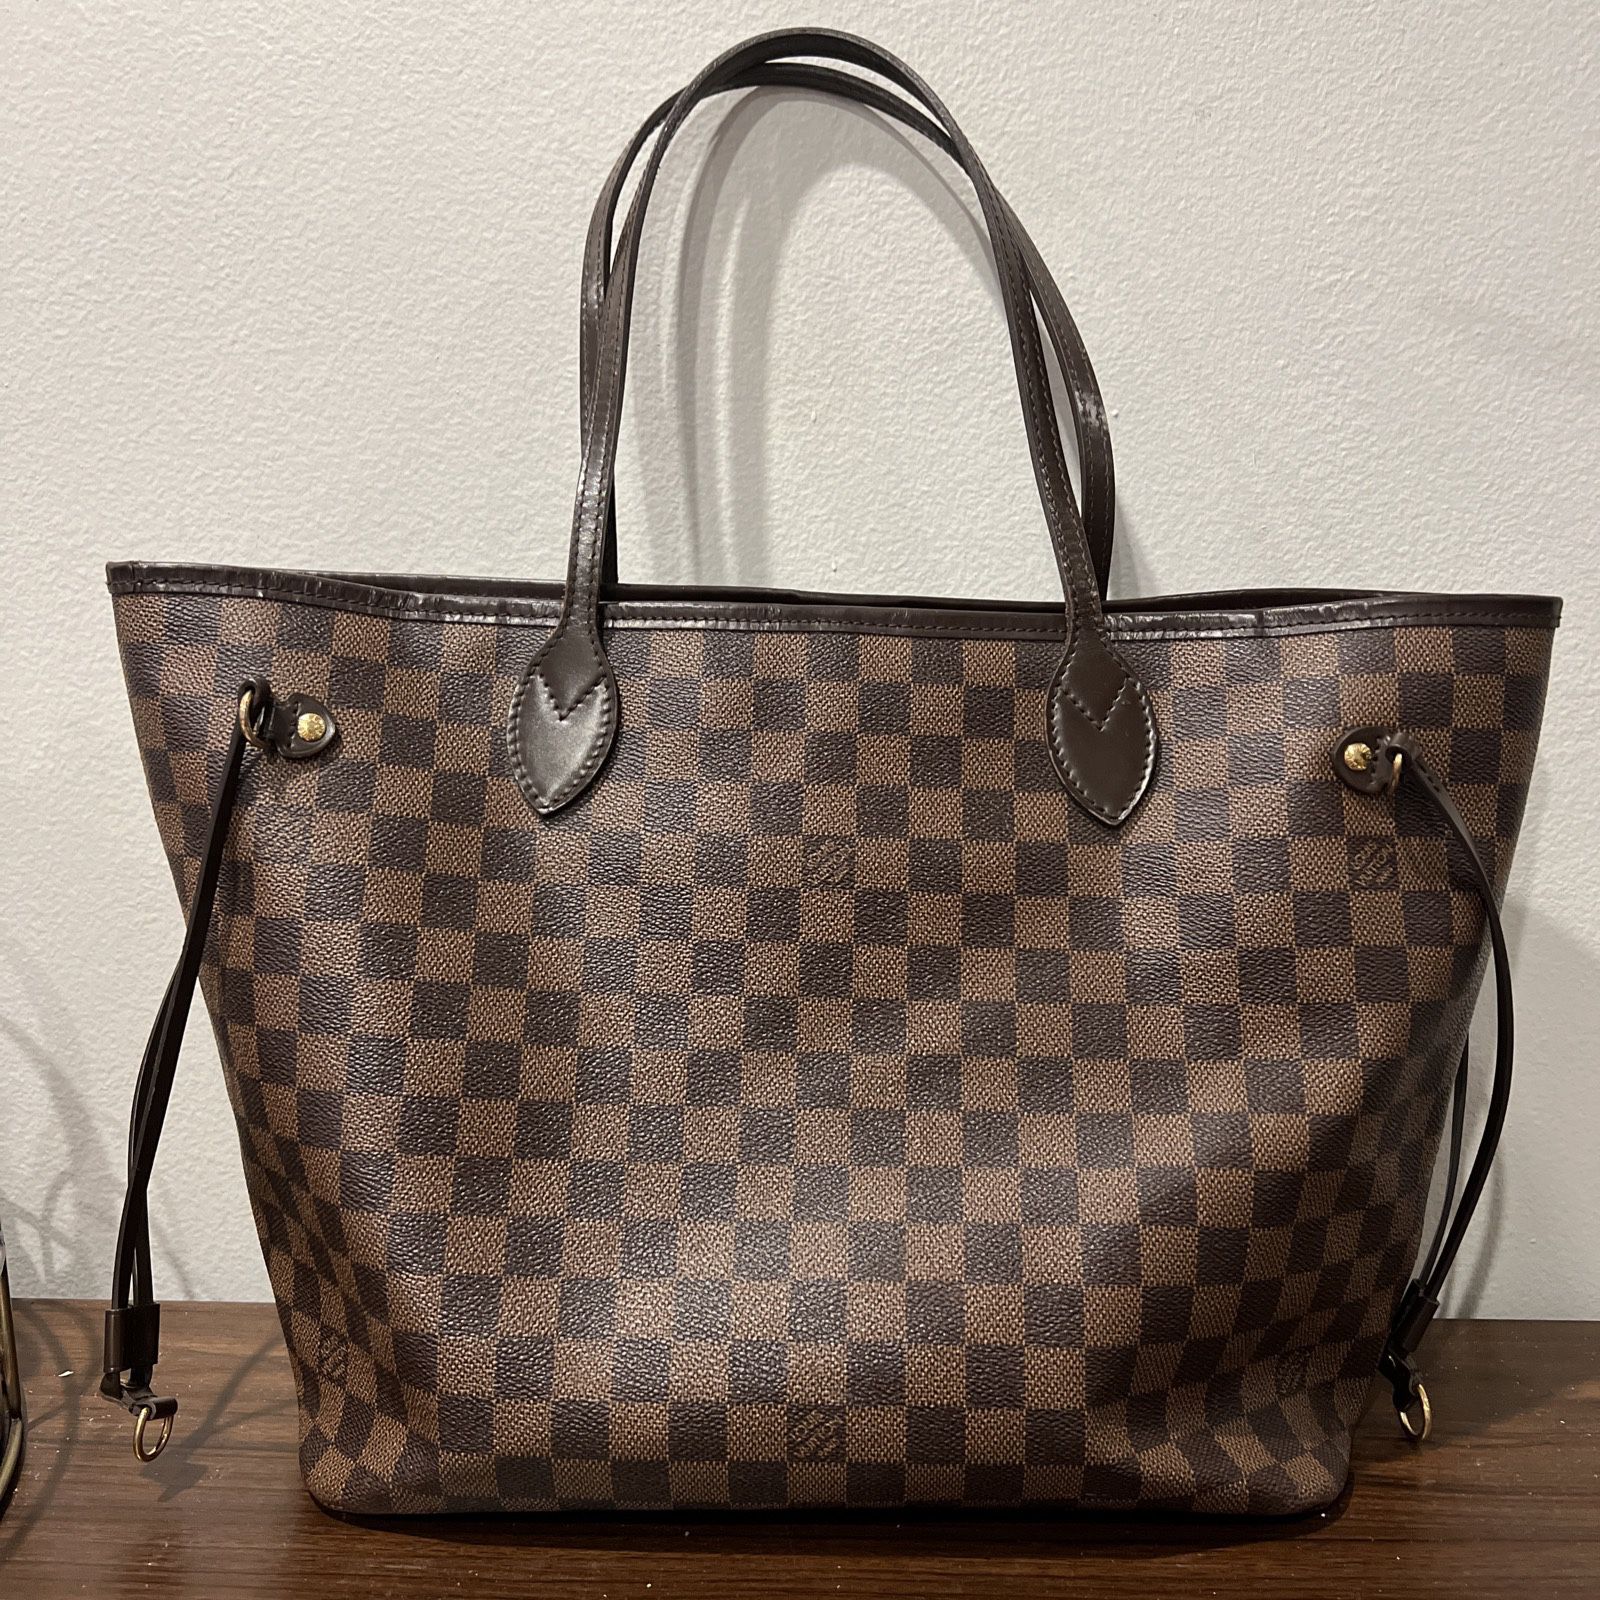 Authentic Louis Vuitton Tote Bag Neverfull MM Damier Ebene Brown